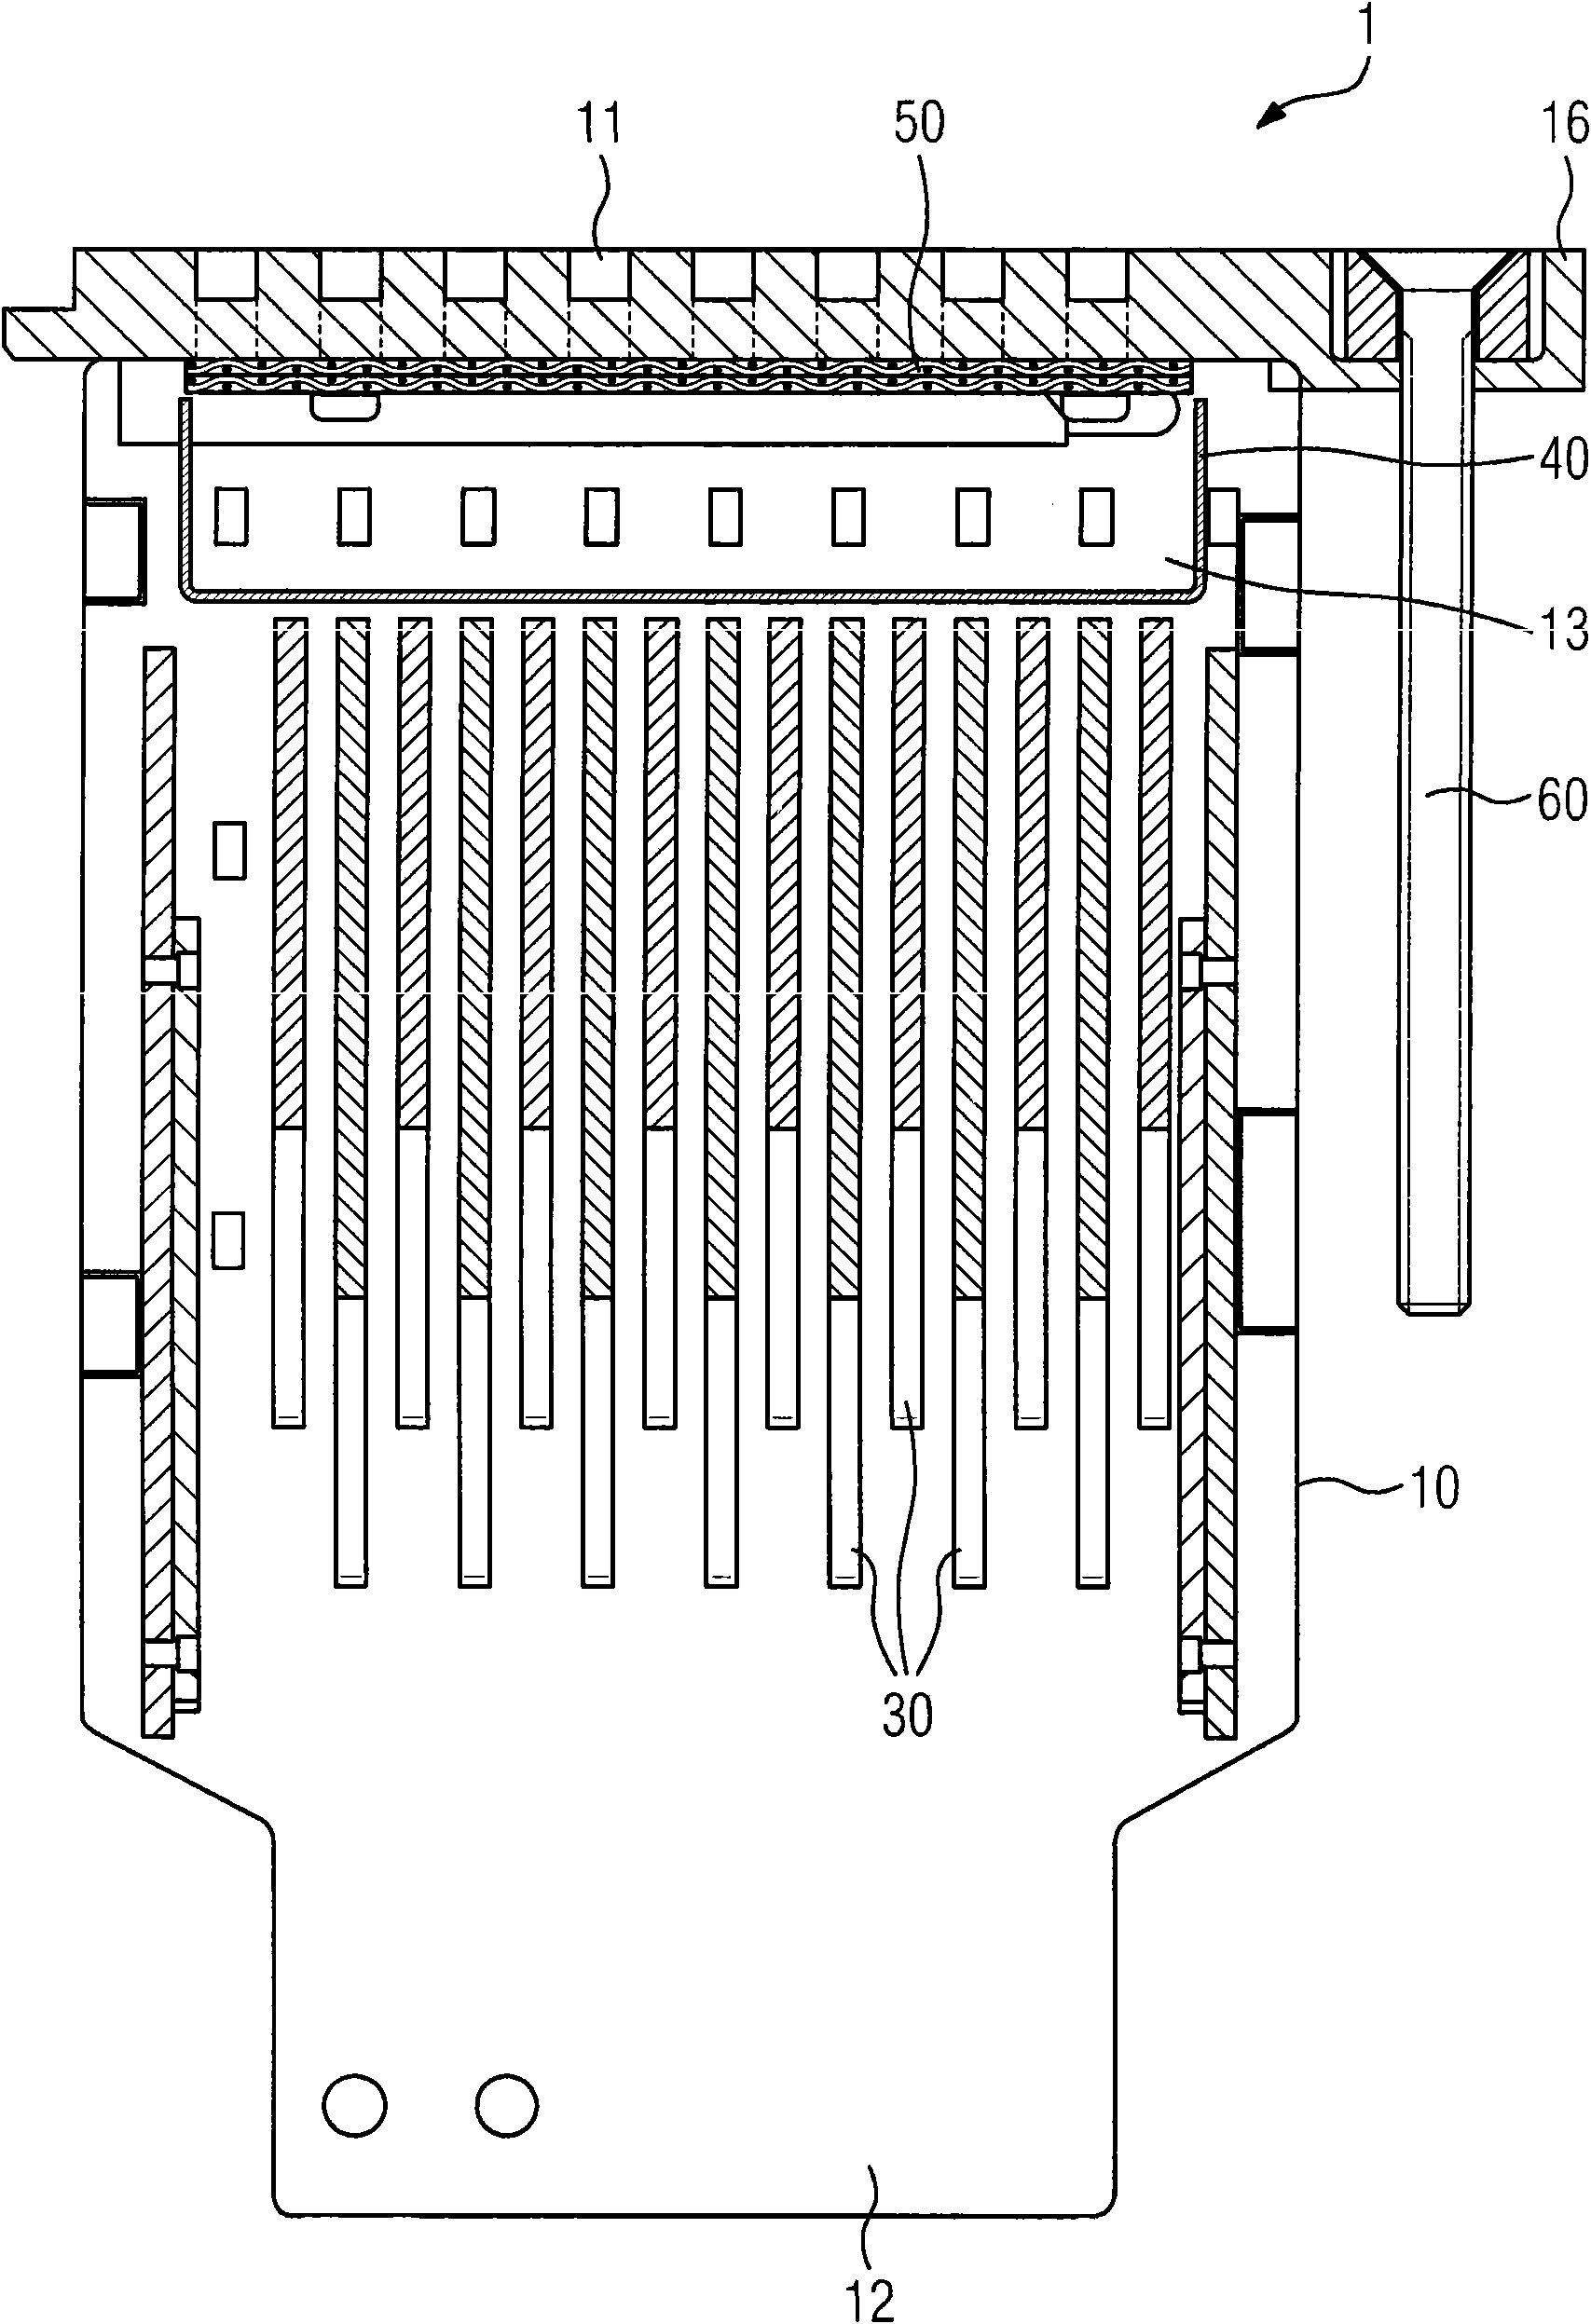 Circuit breaker with switching gas cooling